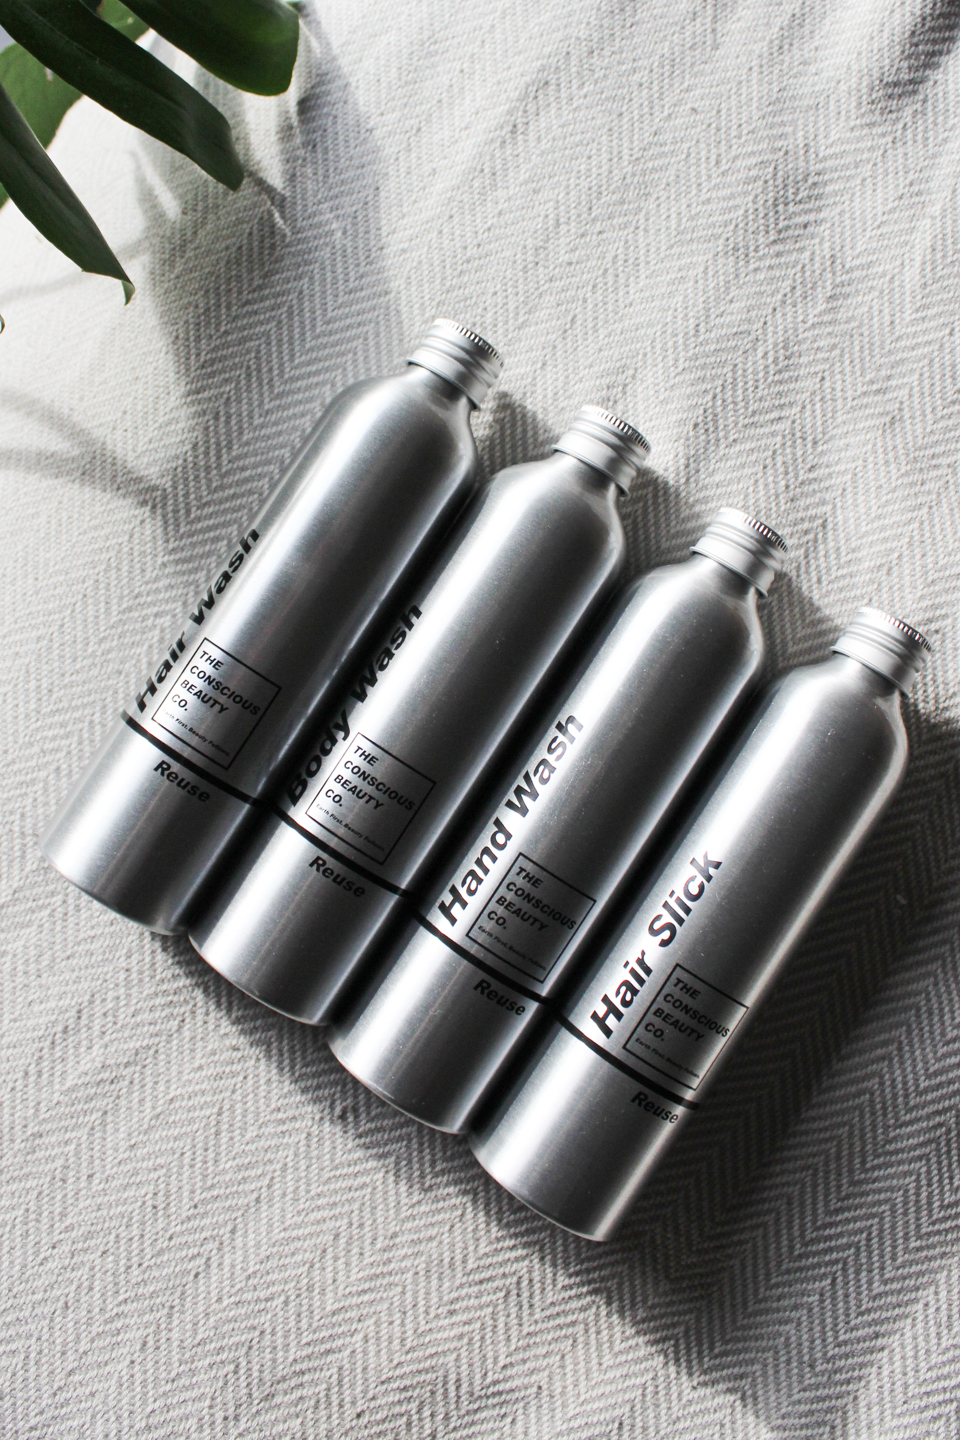 Refillable metal bottles from Conscious Beauty Co.